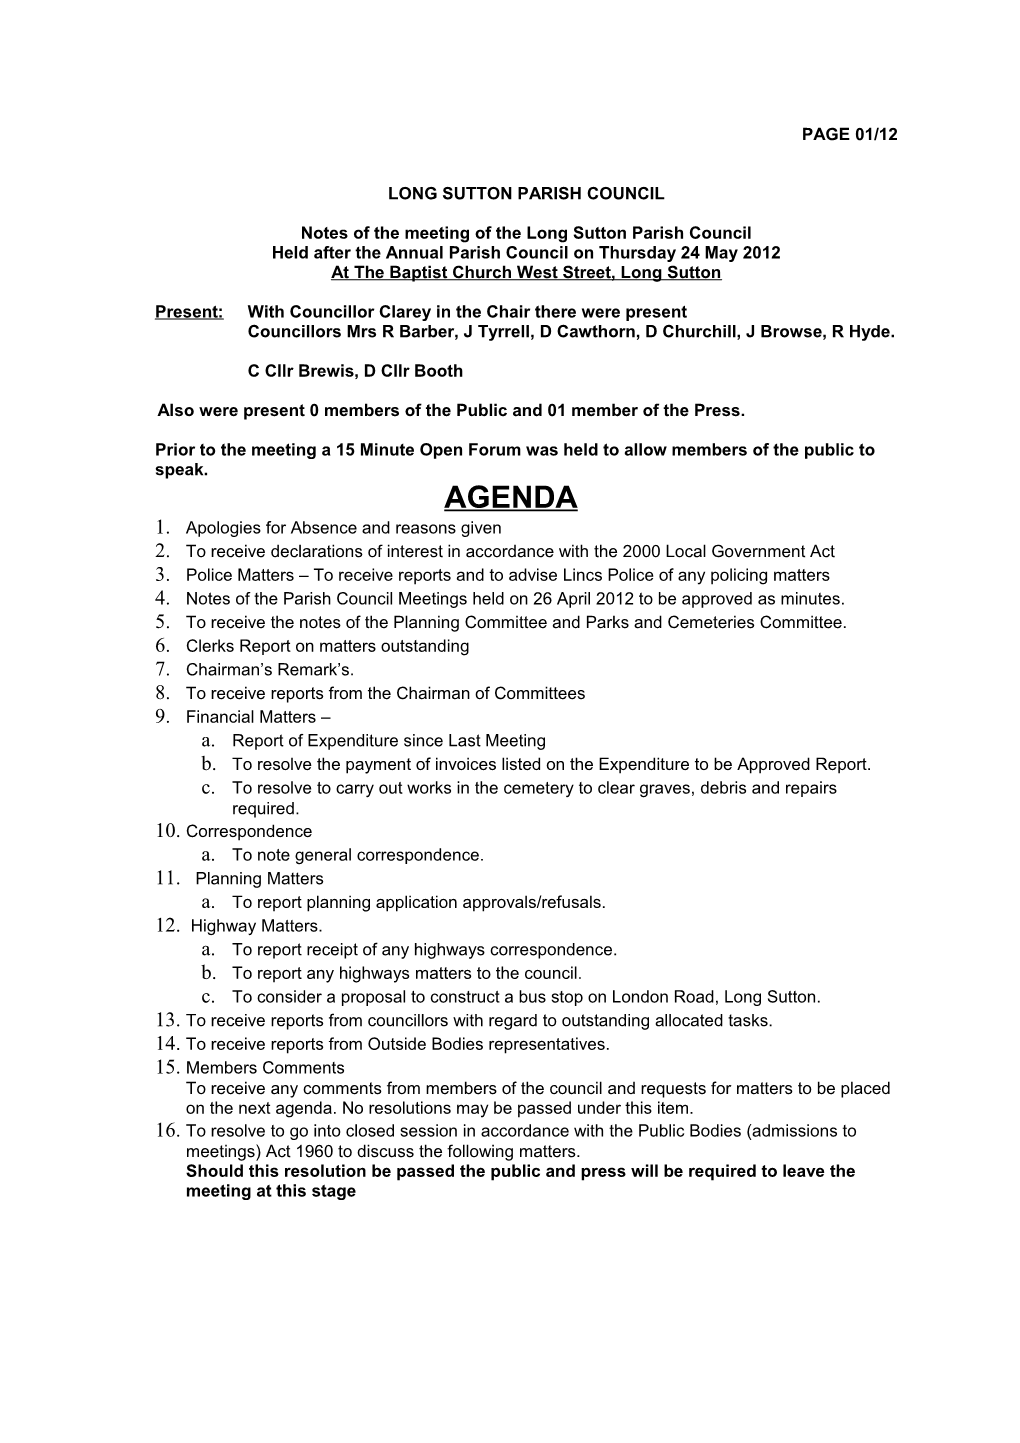 Notes of the Meeting of the Long Sutton Parish Council